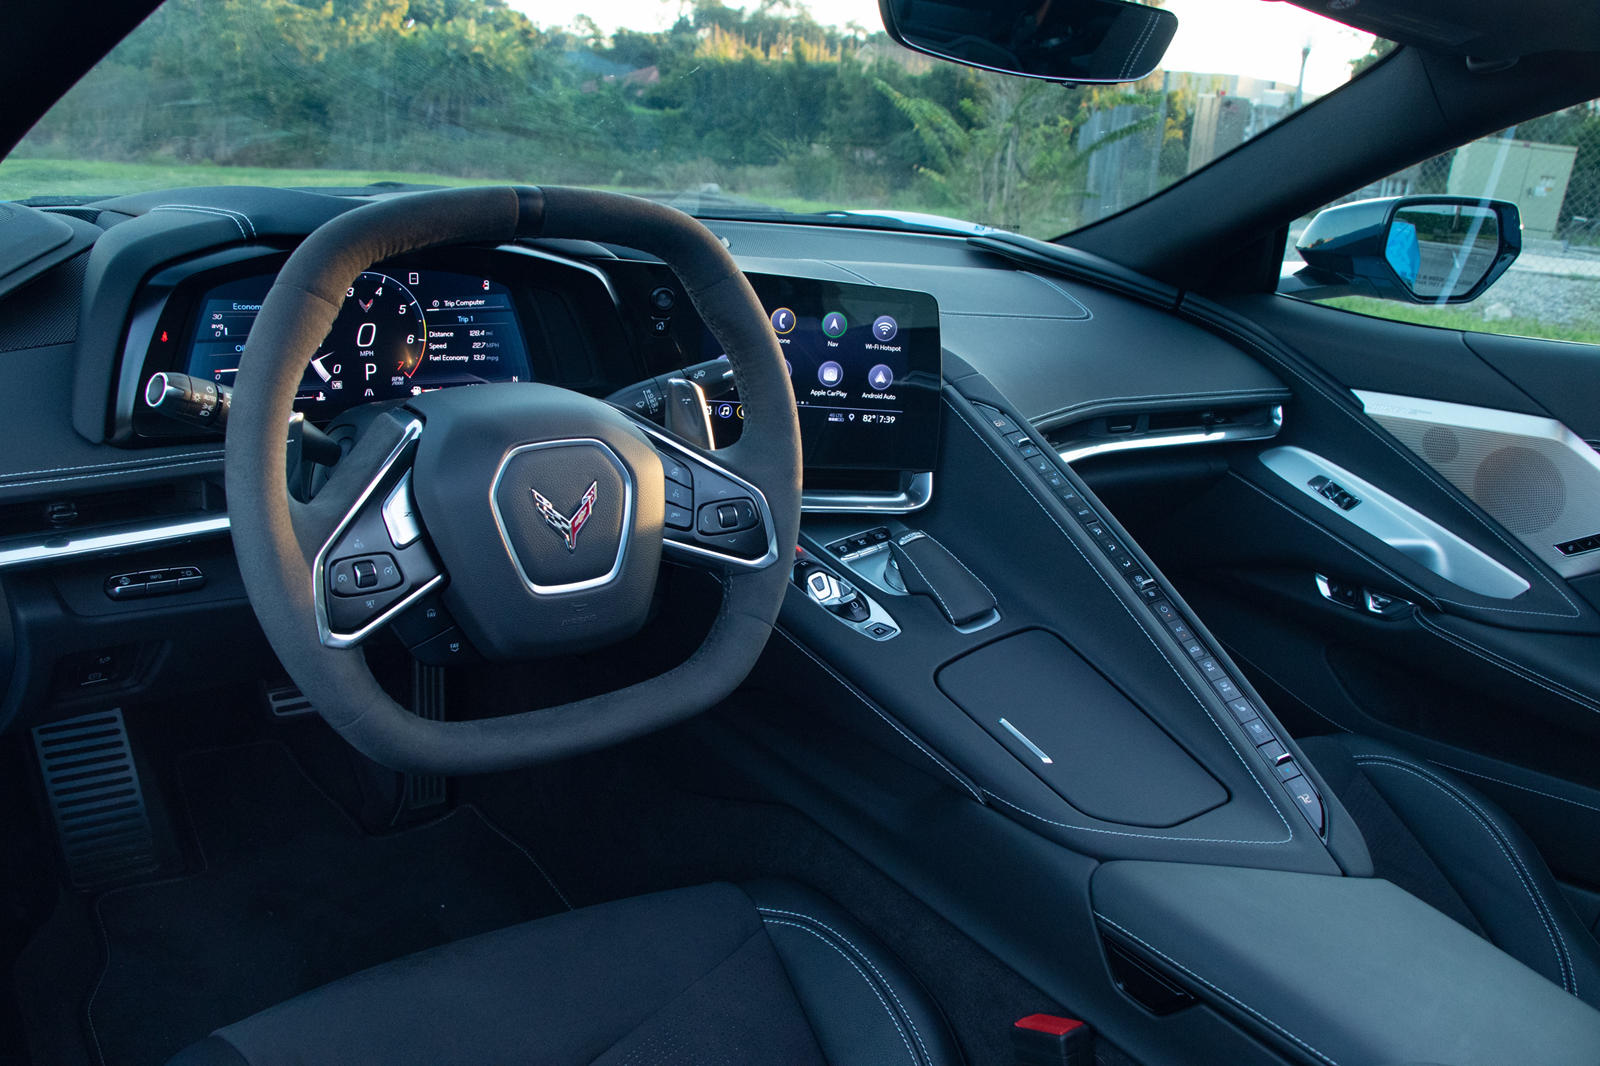 2020 Corvette C8: See The New Fully-Digital Instrument Cluster And Other  Interior Details | Carscoops